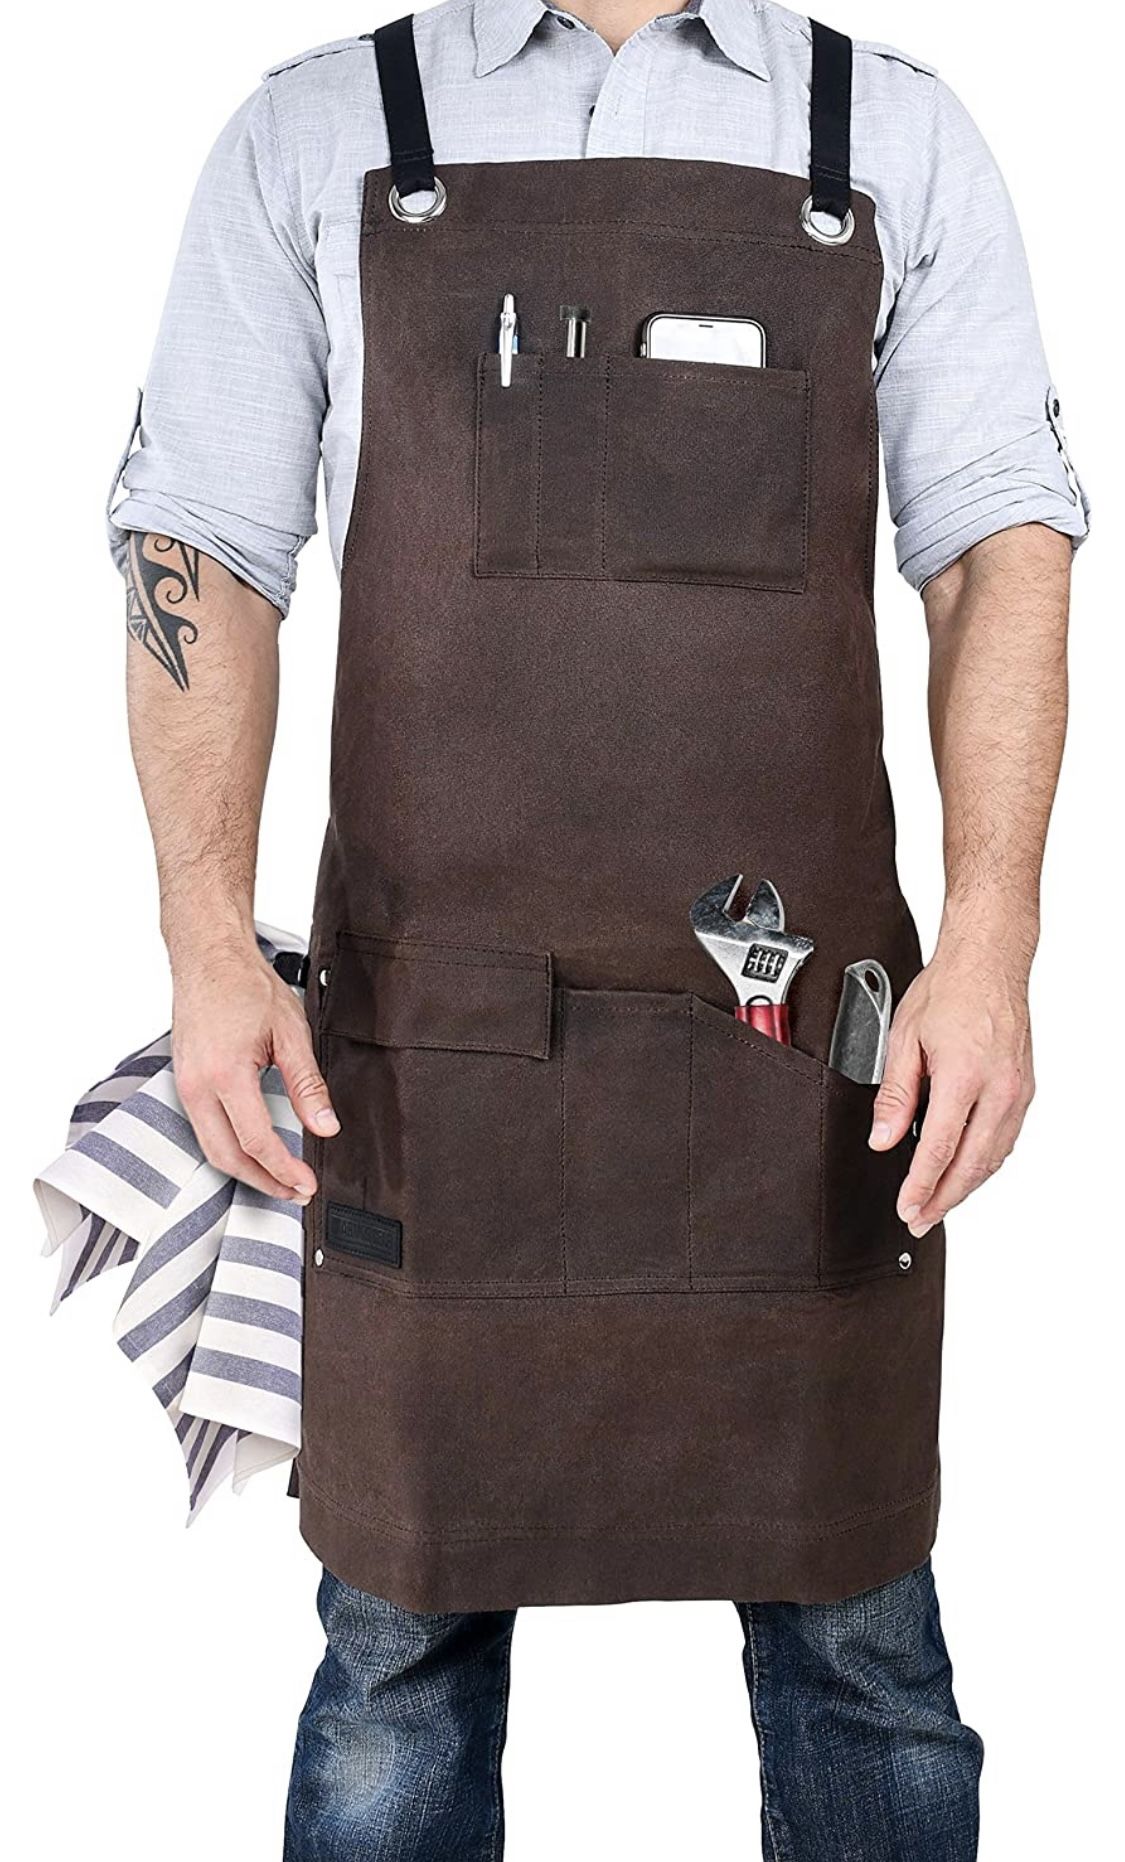 16 Oz Waxed Work Apron - Cooking Bbq Grill Woodworking - New